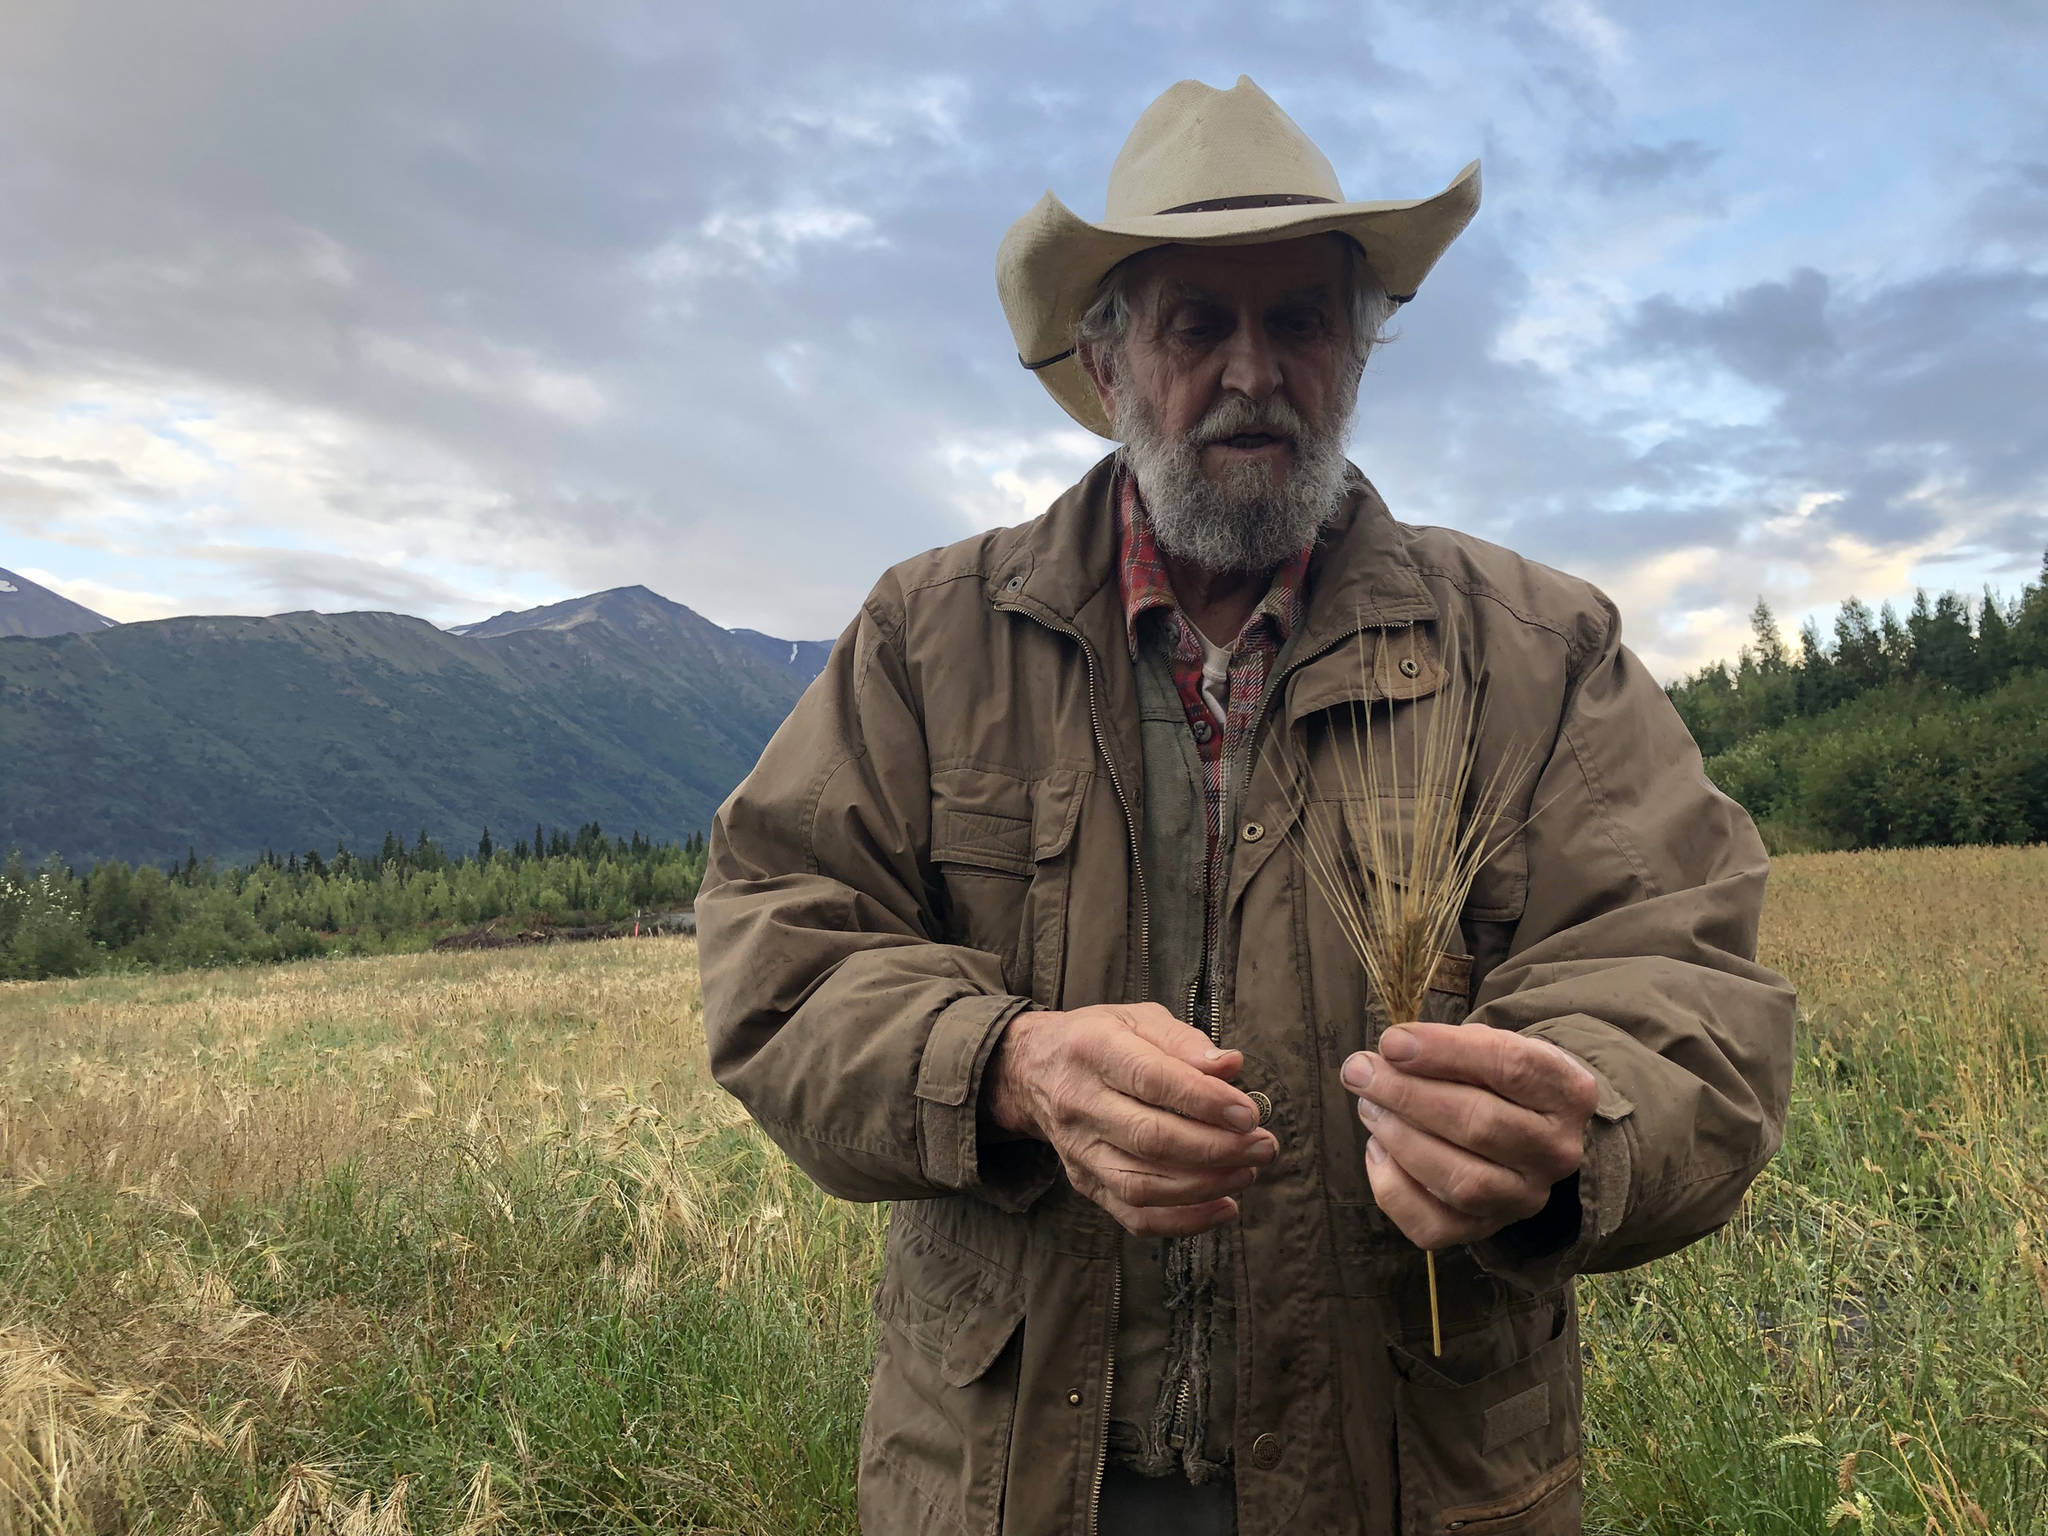 Robert Gibson of Cooper Landing holds up a piece of two-row barley, which is used best in distilliation processes, on Friday, Aug. 31, 2018, at a small barley field planted by the Kenai Peninsula Borough in a vacant gravel pit in Cooper Landing, Alaska. (Photo by Victoria Petersen/Peninsula Clarion)